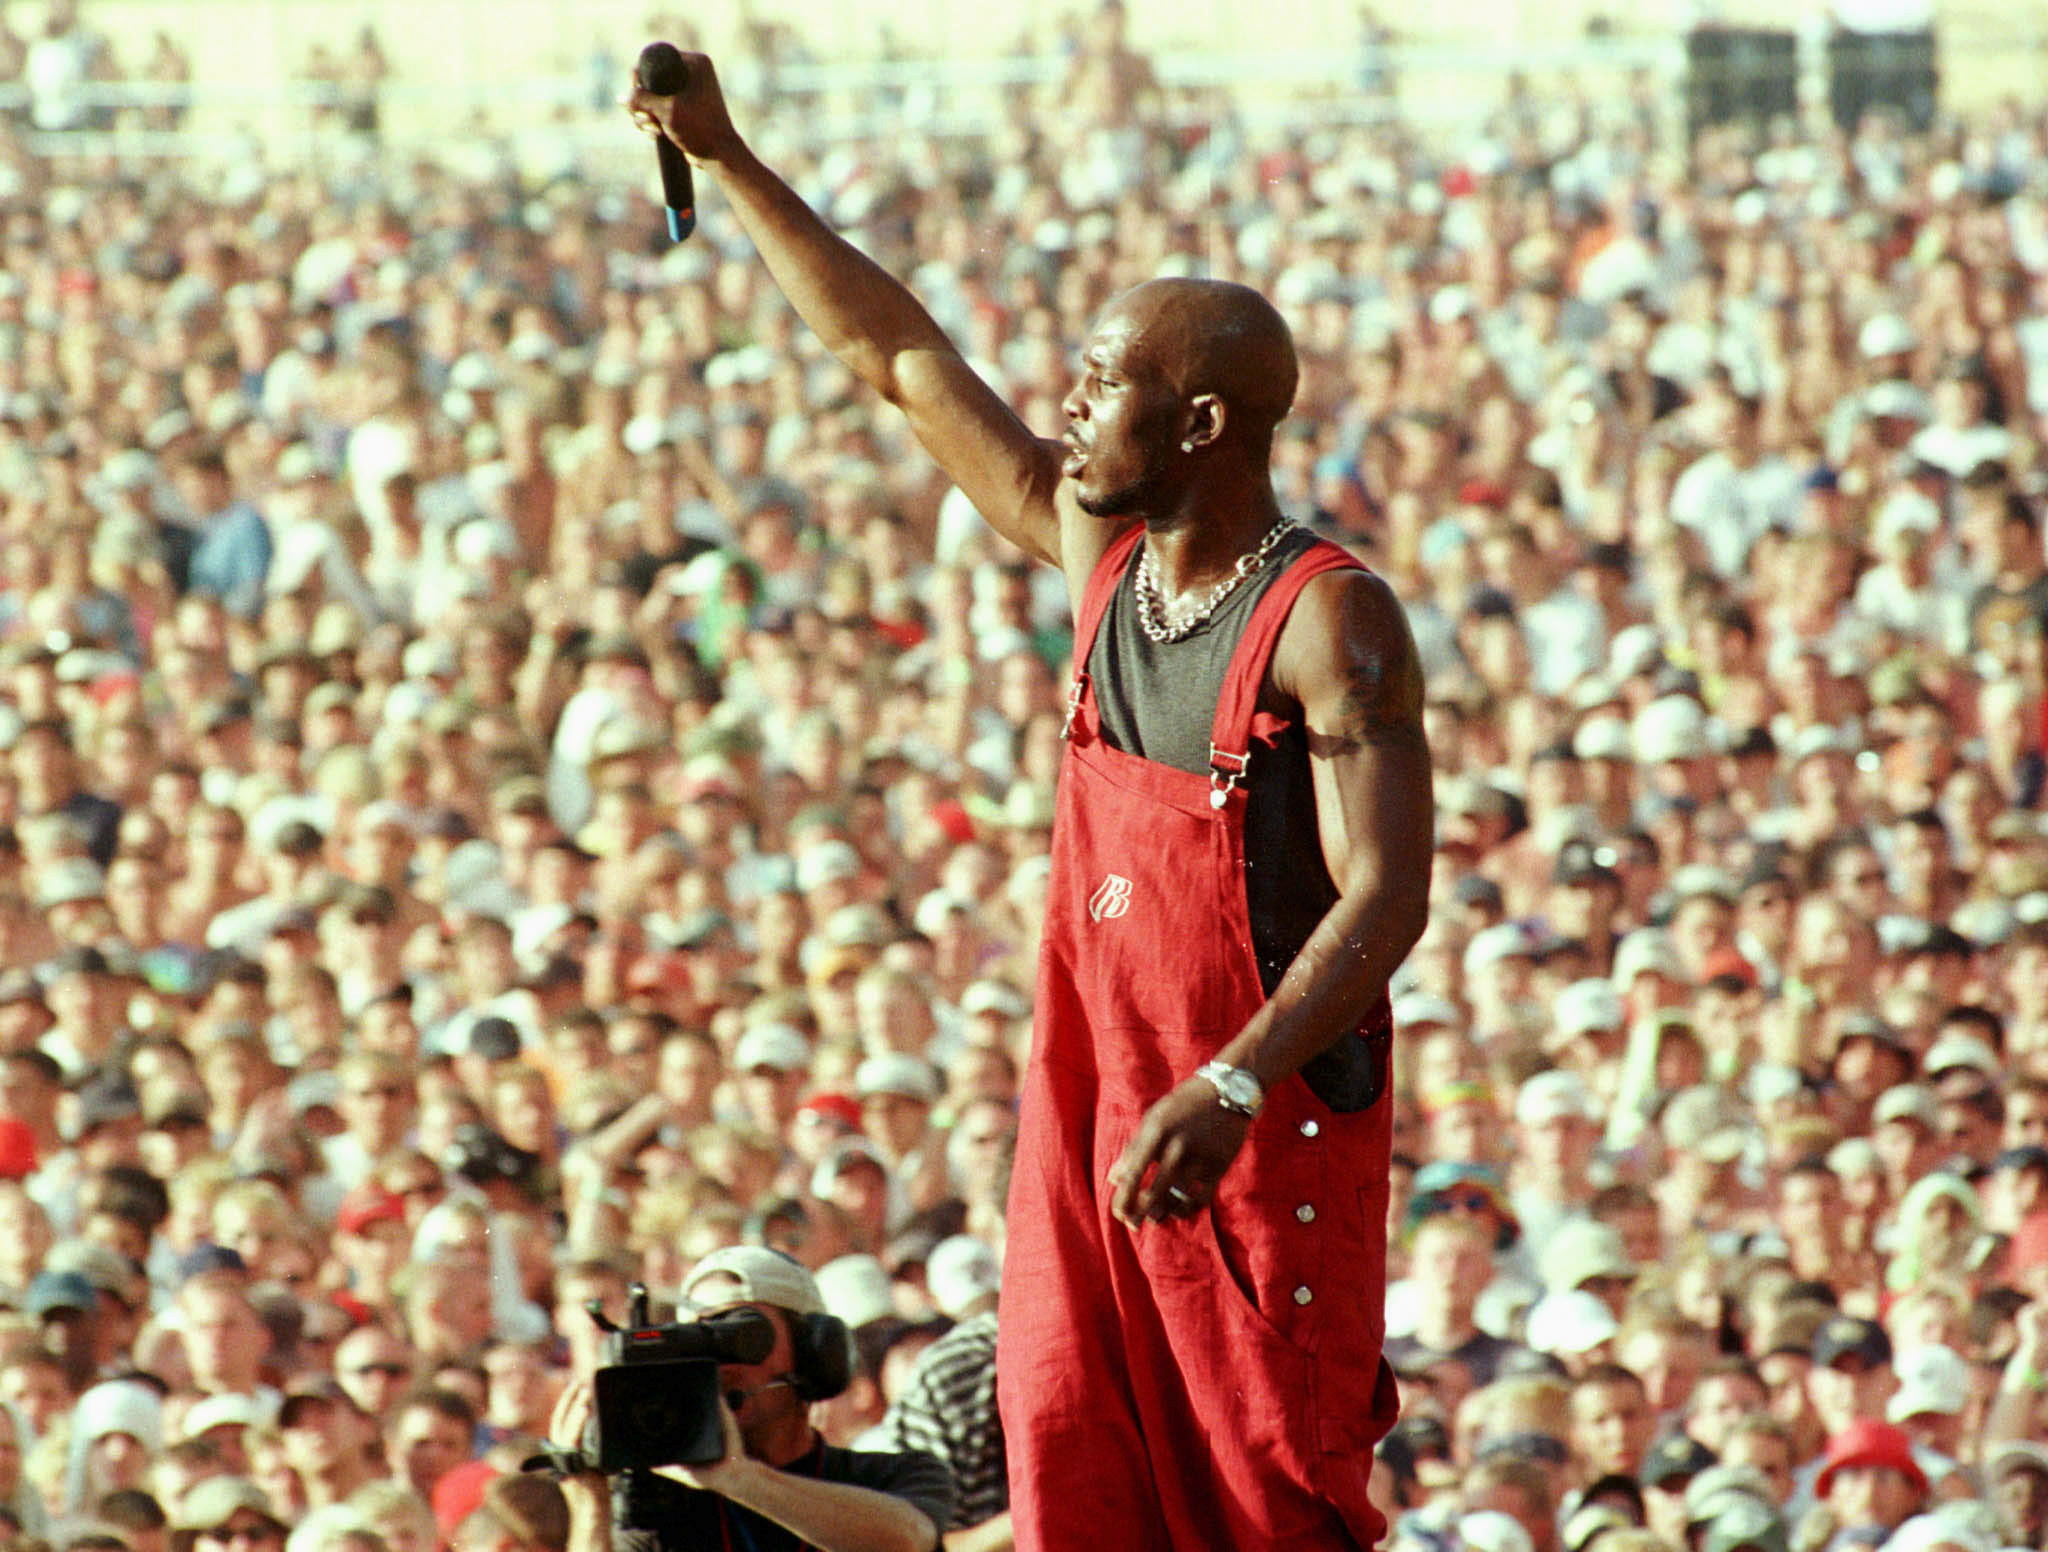 Earl Simmons, better known as rap musician DMX, performs on the main stage at the Woodstock music and arts festival in Rome, New York, U.S. July 23, 1999. REUTERS/Joe Traver/File Photo